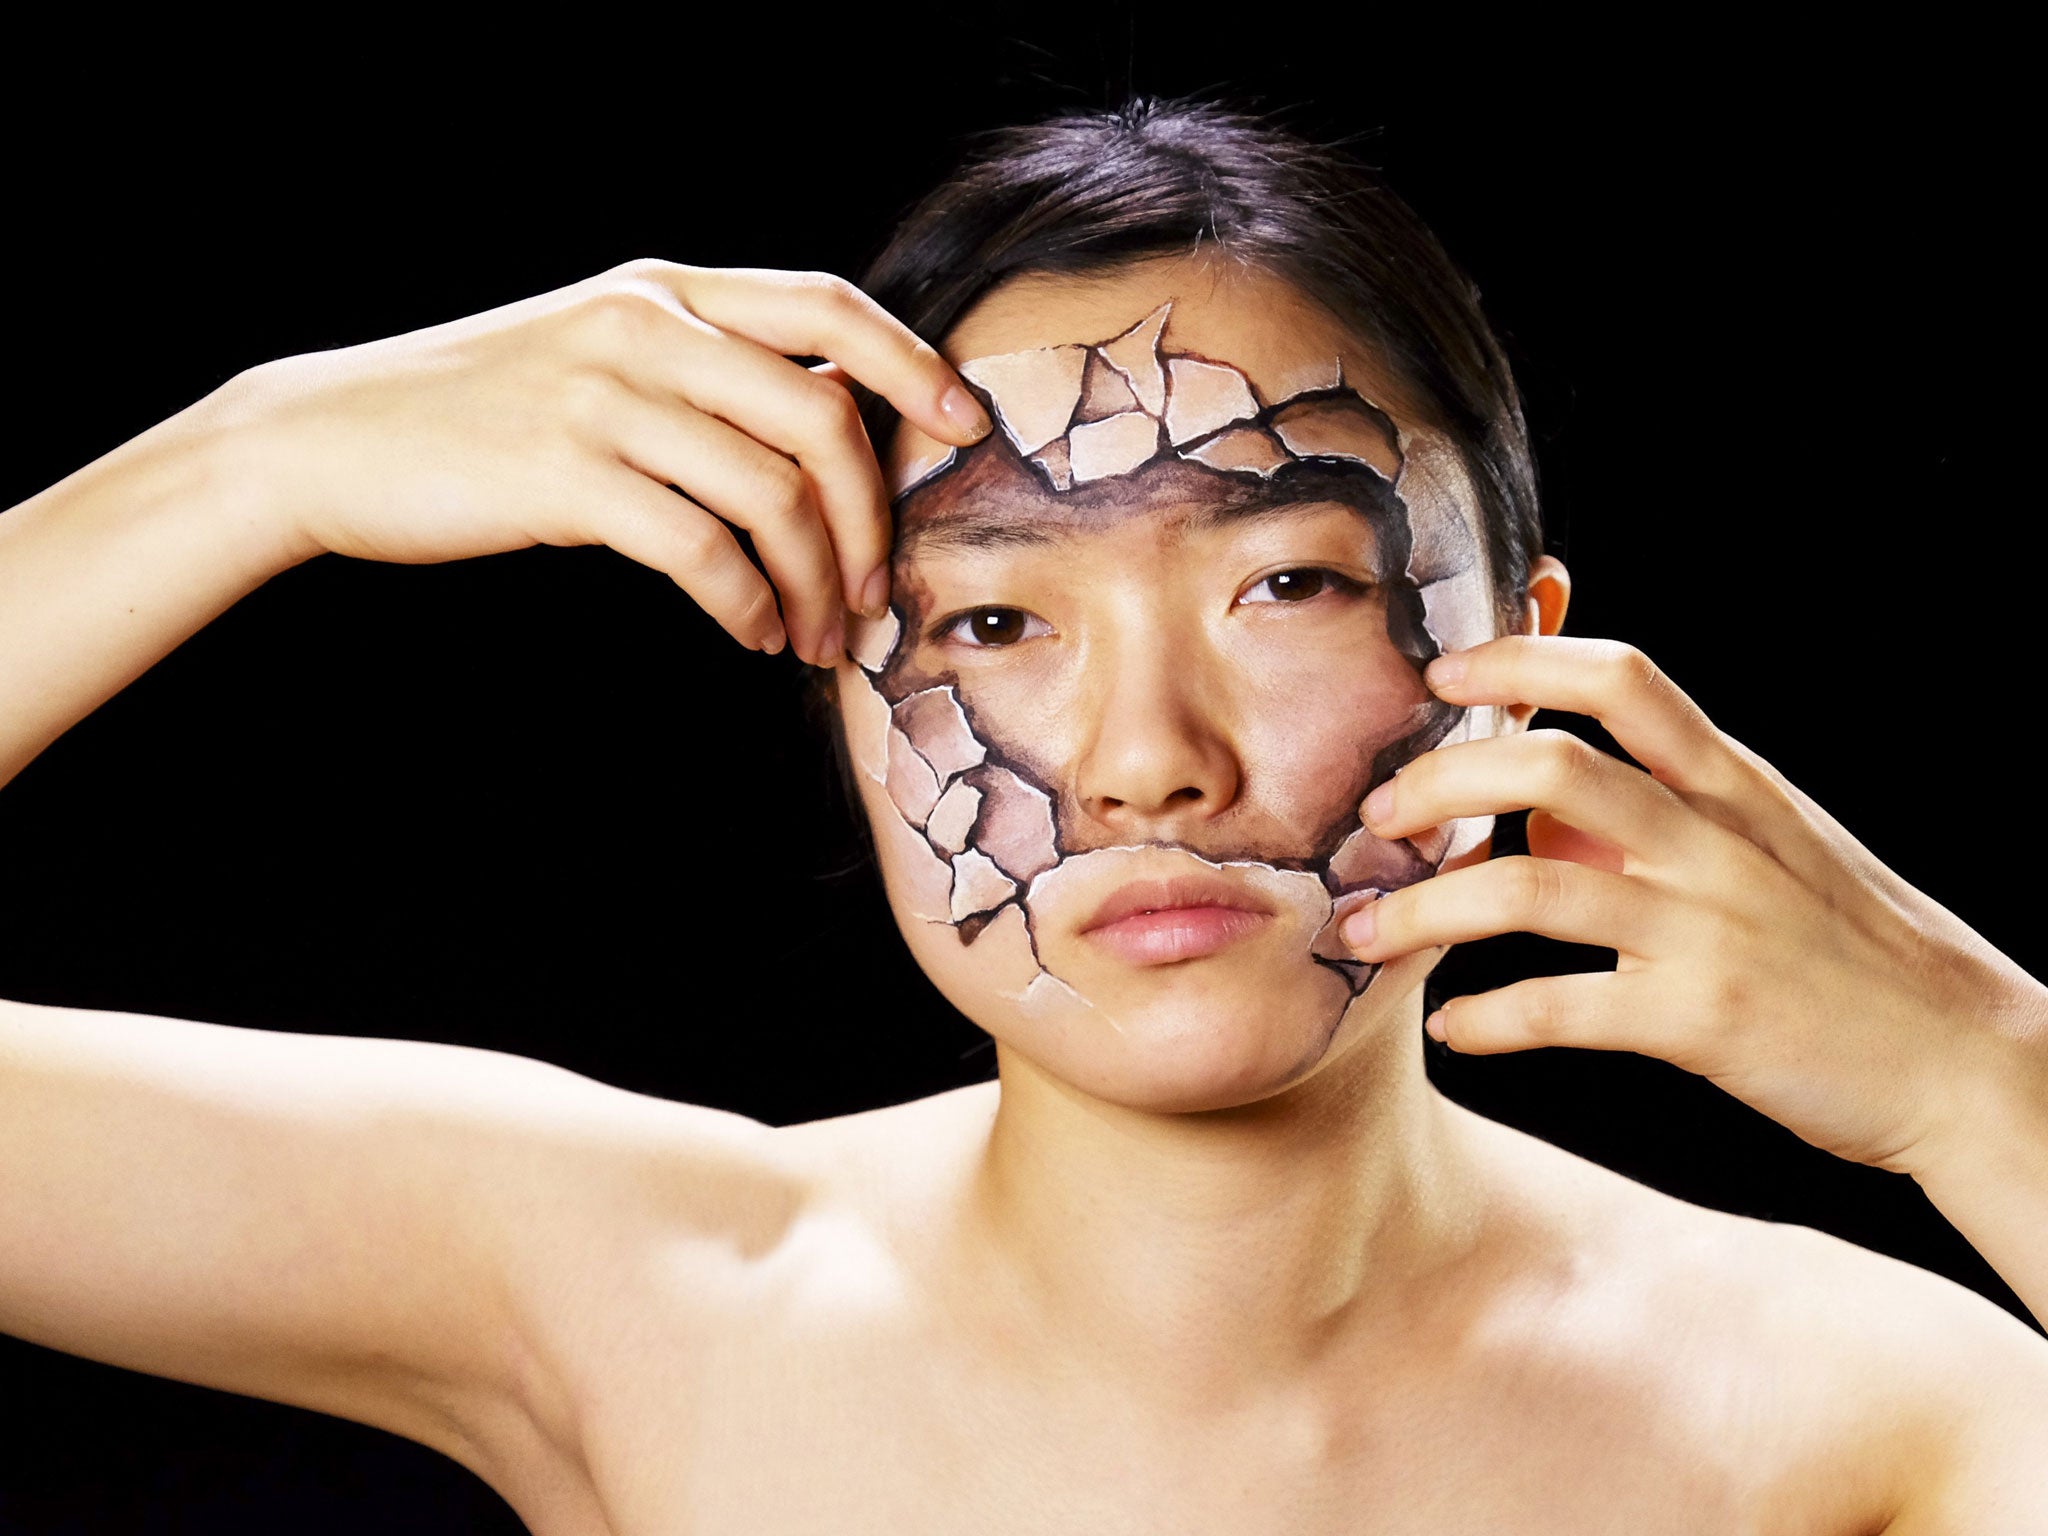 Hikaru Cho has created striking body art paintings for Amnesty International's global campaign 'My Body My Rights'